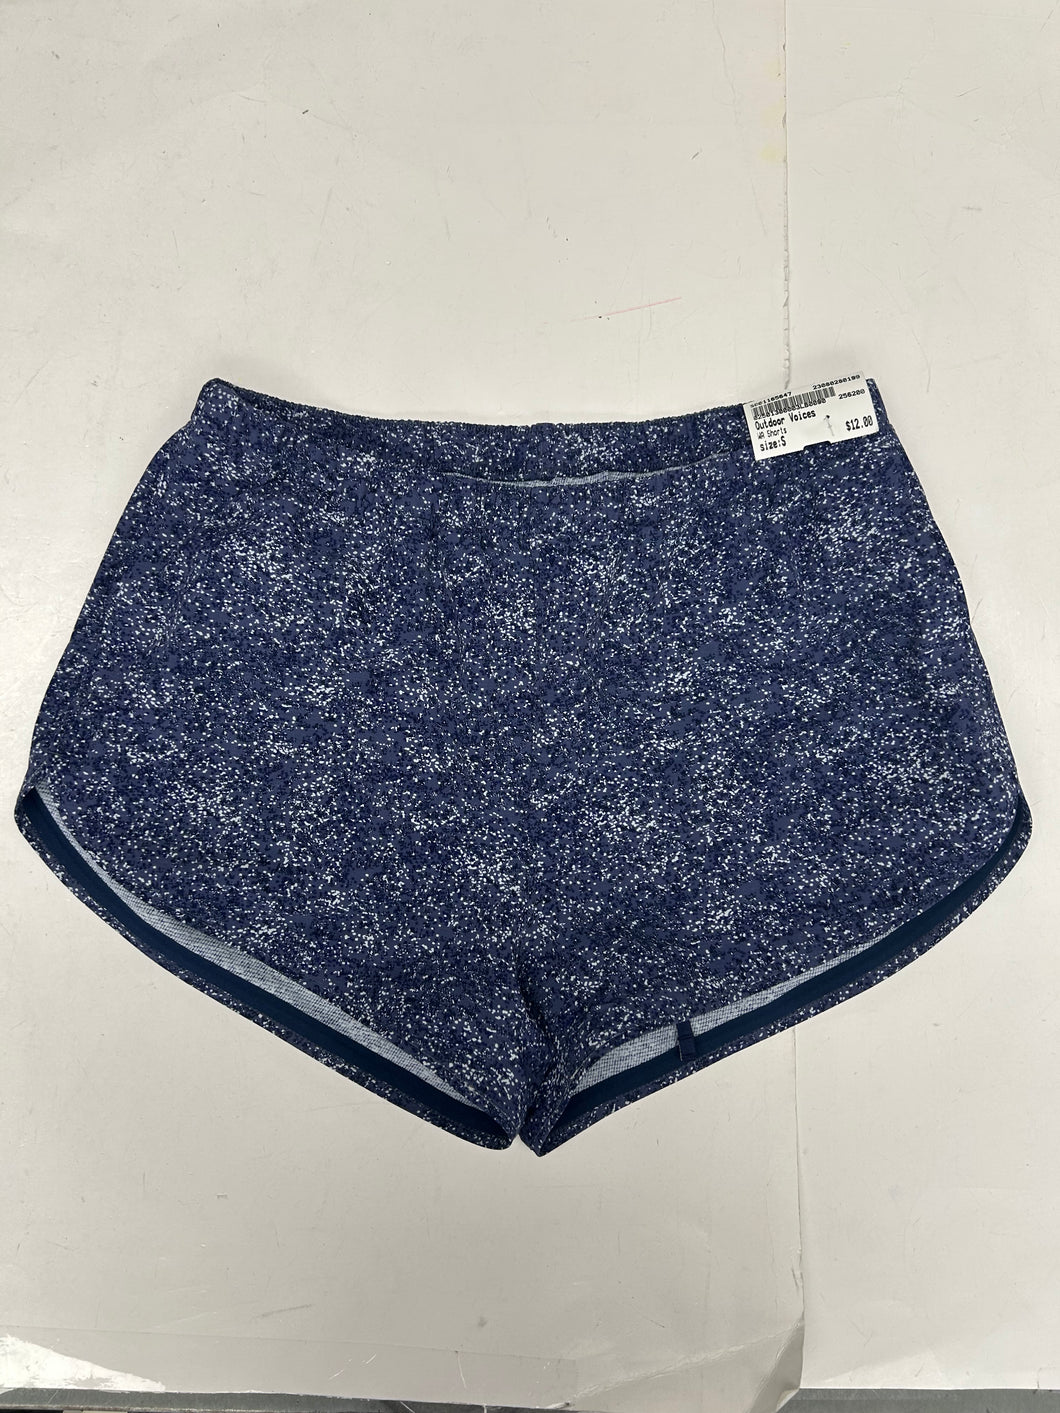 Outdoor Voices Athletic Shorts Size Small